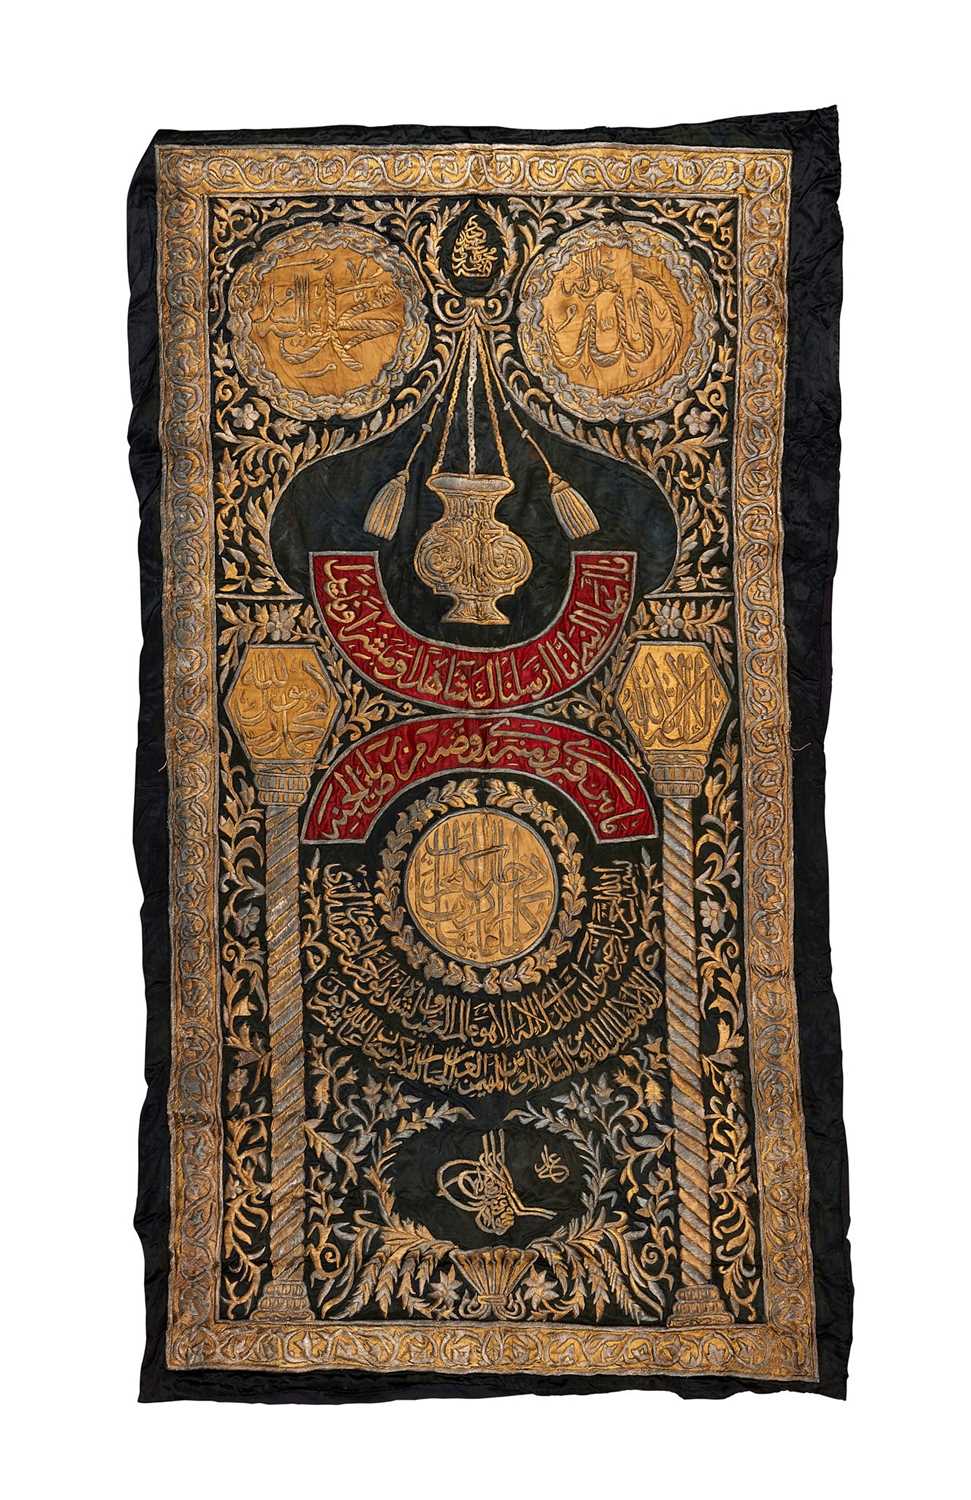 AN IMPORTANT OTTOMAN SILVER THREAD CURTAIN, WITH THE TUGHRA OF SULTAN MAHMUD II